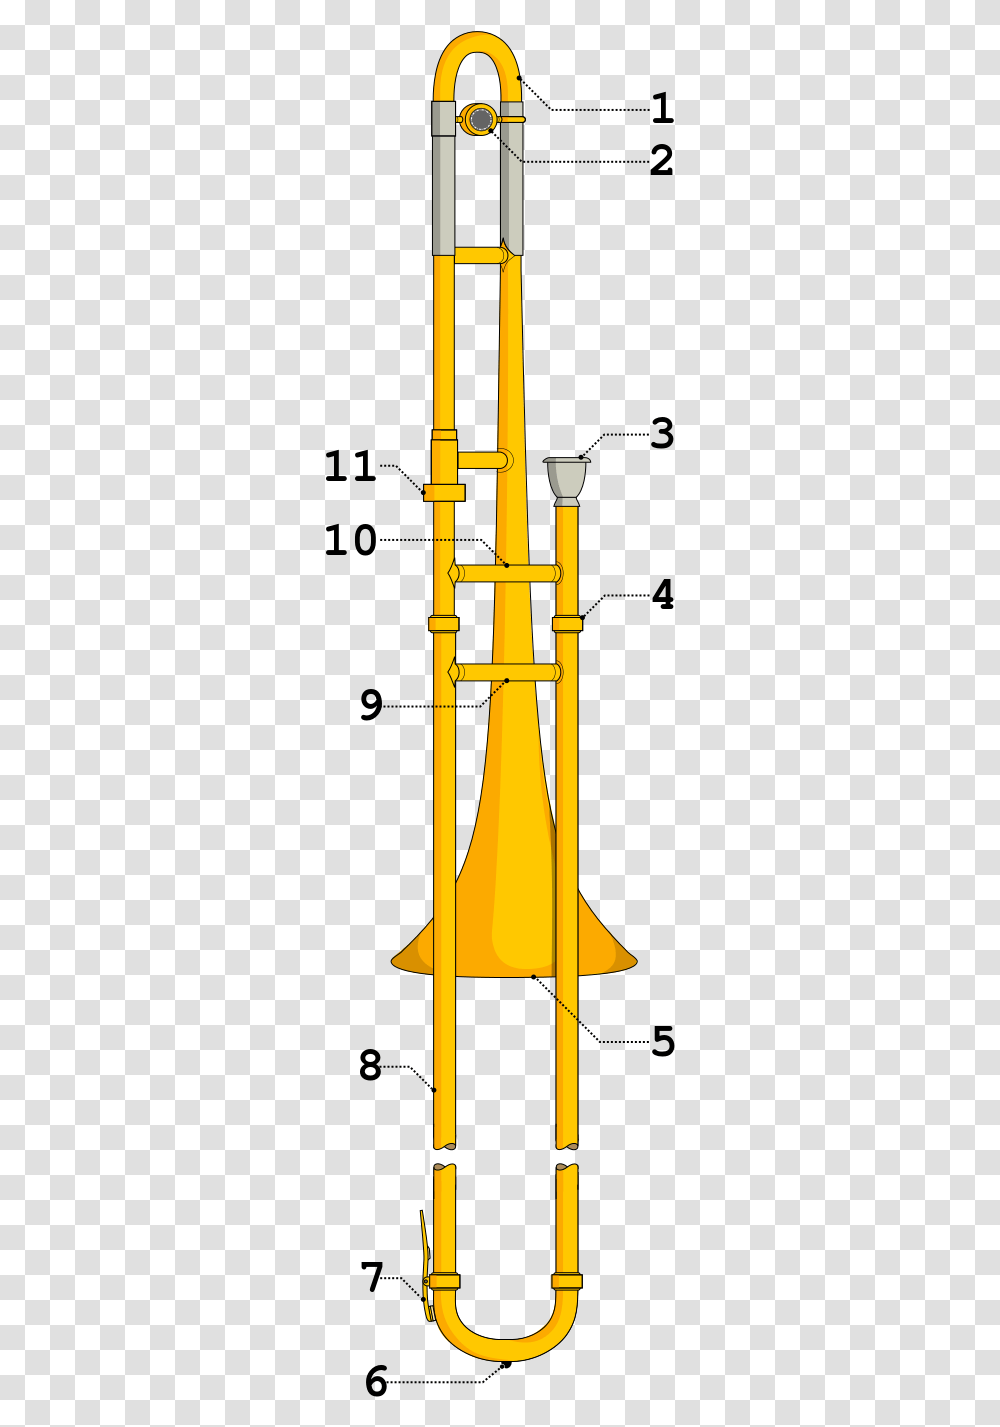 Diagram Of A Trombone, Musical Instrument, Brass Section, Horn, Utility Pole Transparent Png